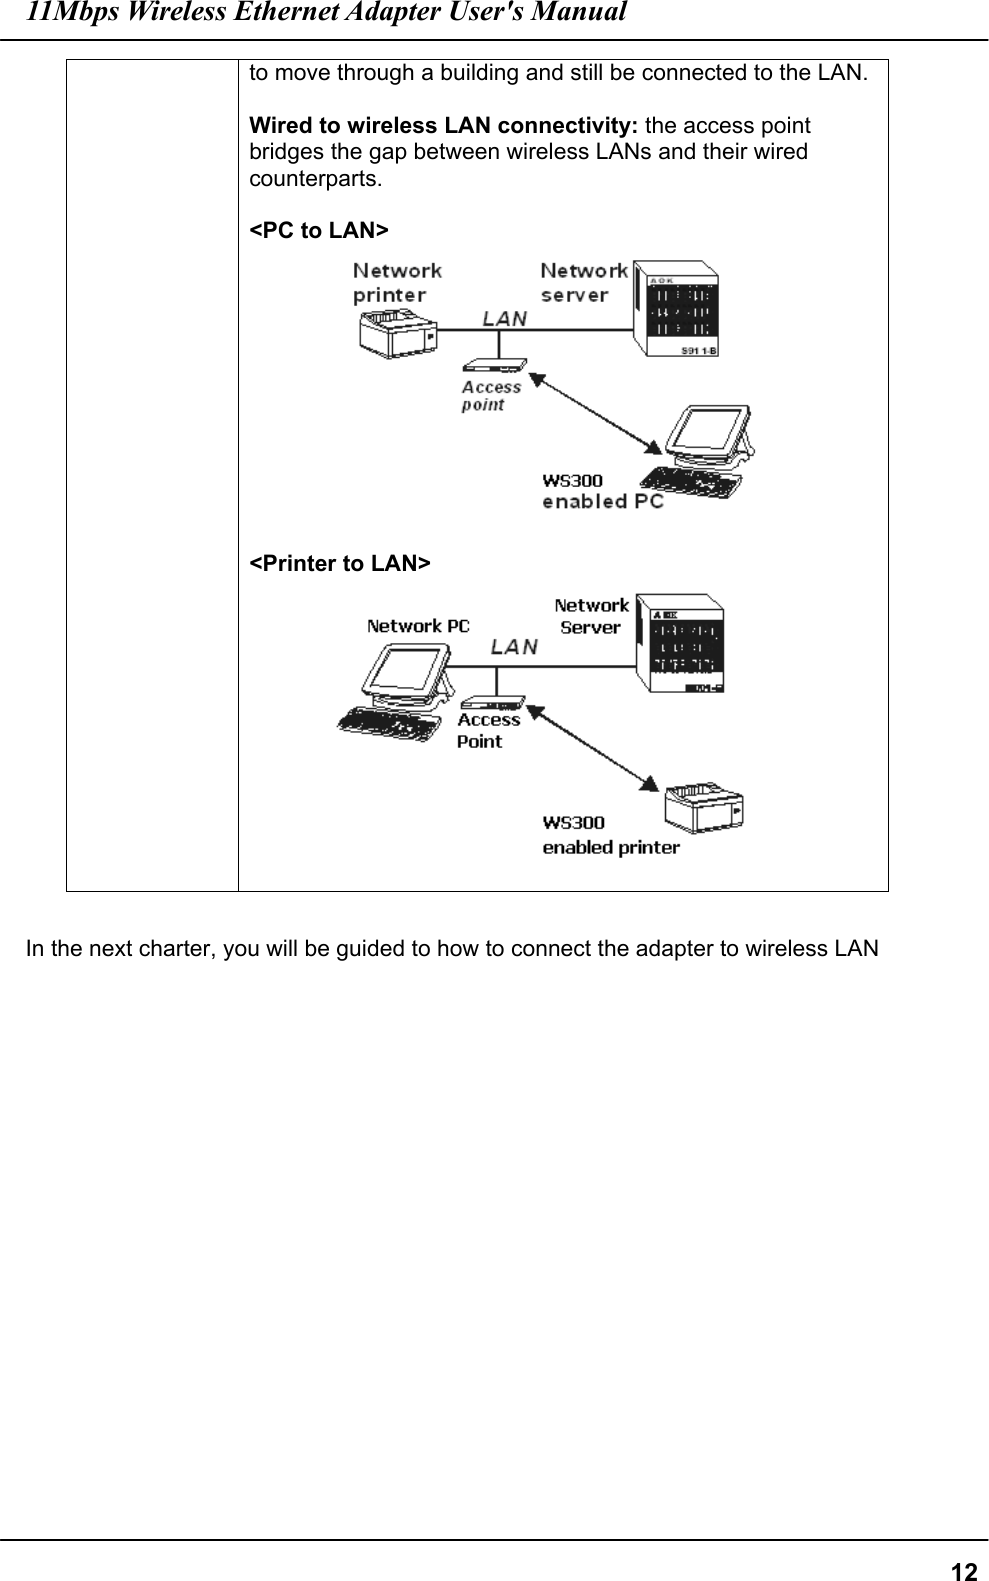 11Mbps Wireless Ethernet Adapter User&apos;s Manual  12to move through a building and still be connected to the LAN.  Wired to wireless LAN connectivity: the access point bridges the gap between wireless LANs and their wired counterparts.  &lt;PC to LAN&gt;  &lt;Printer to LAN&gt;   In the next charter, you will be guided to how to connect the adapter to wireless LAN   